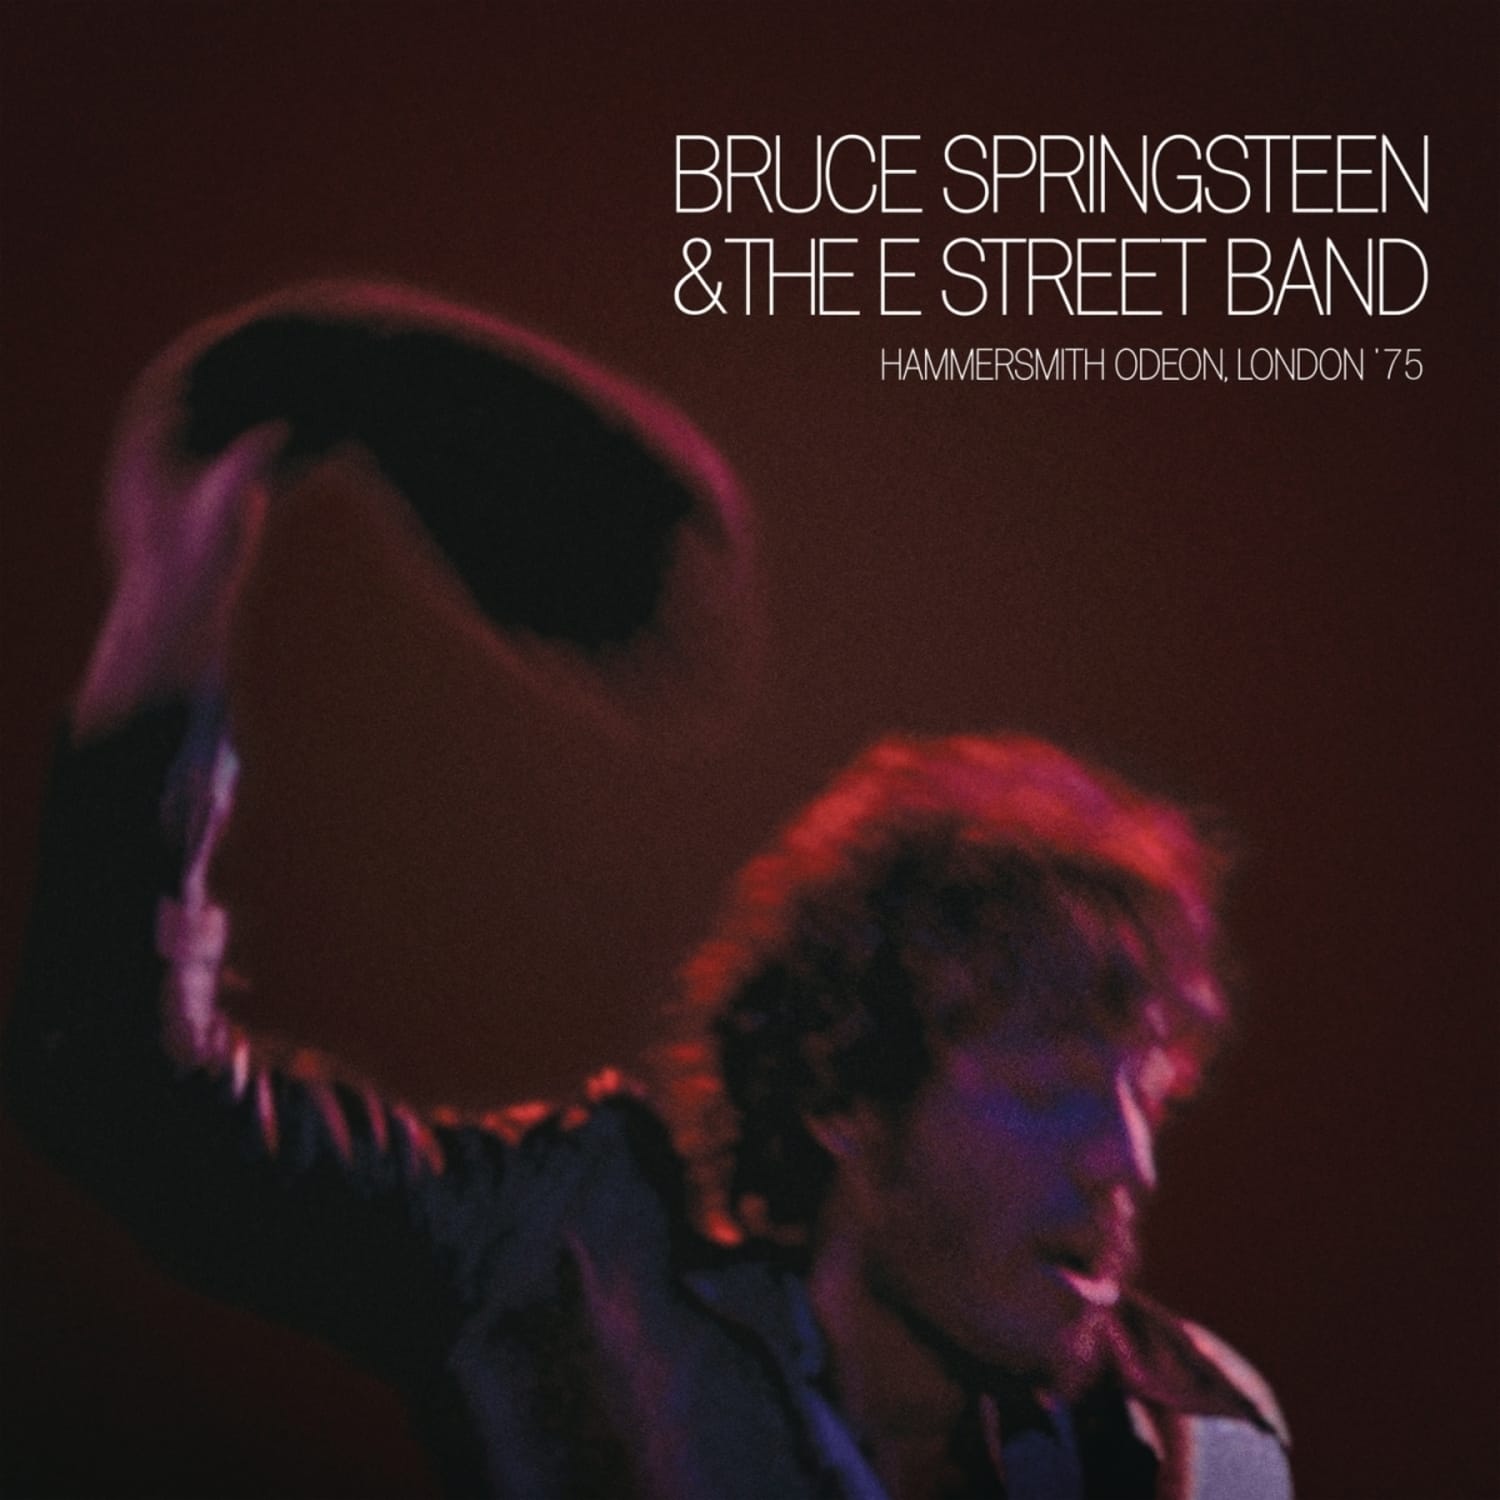 Bruce Springsteen & The E Street Band - HAMMERSMITH ODEON,LONDON 75 